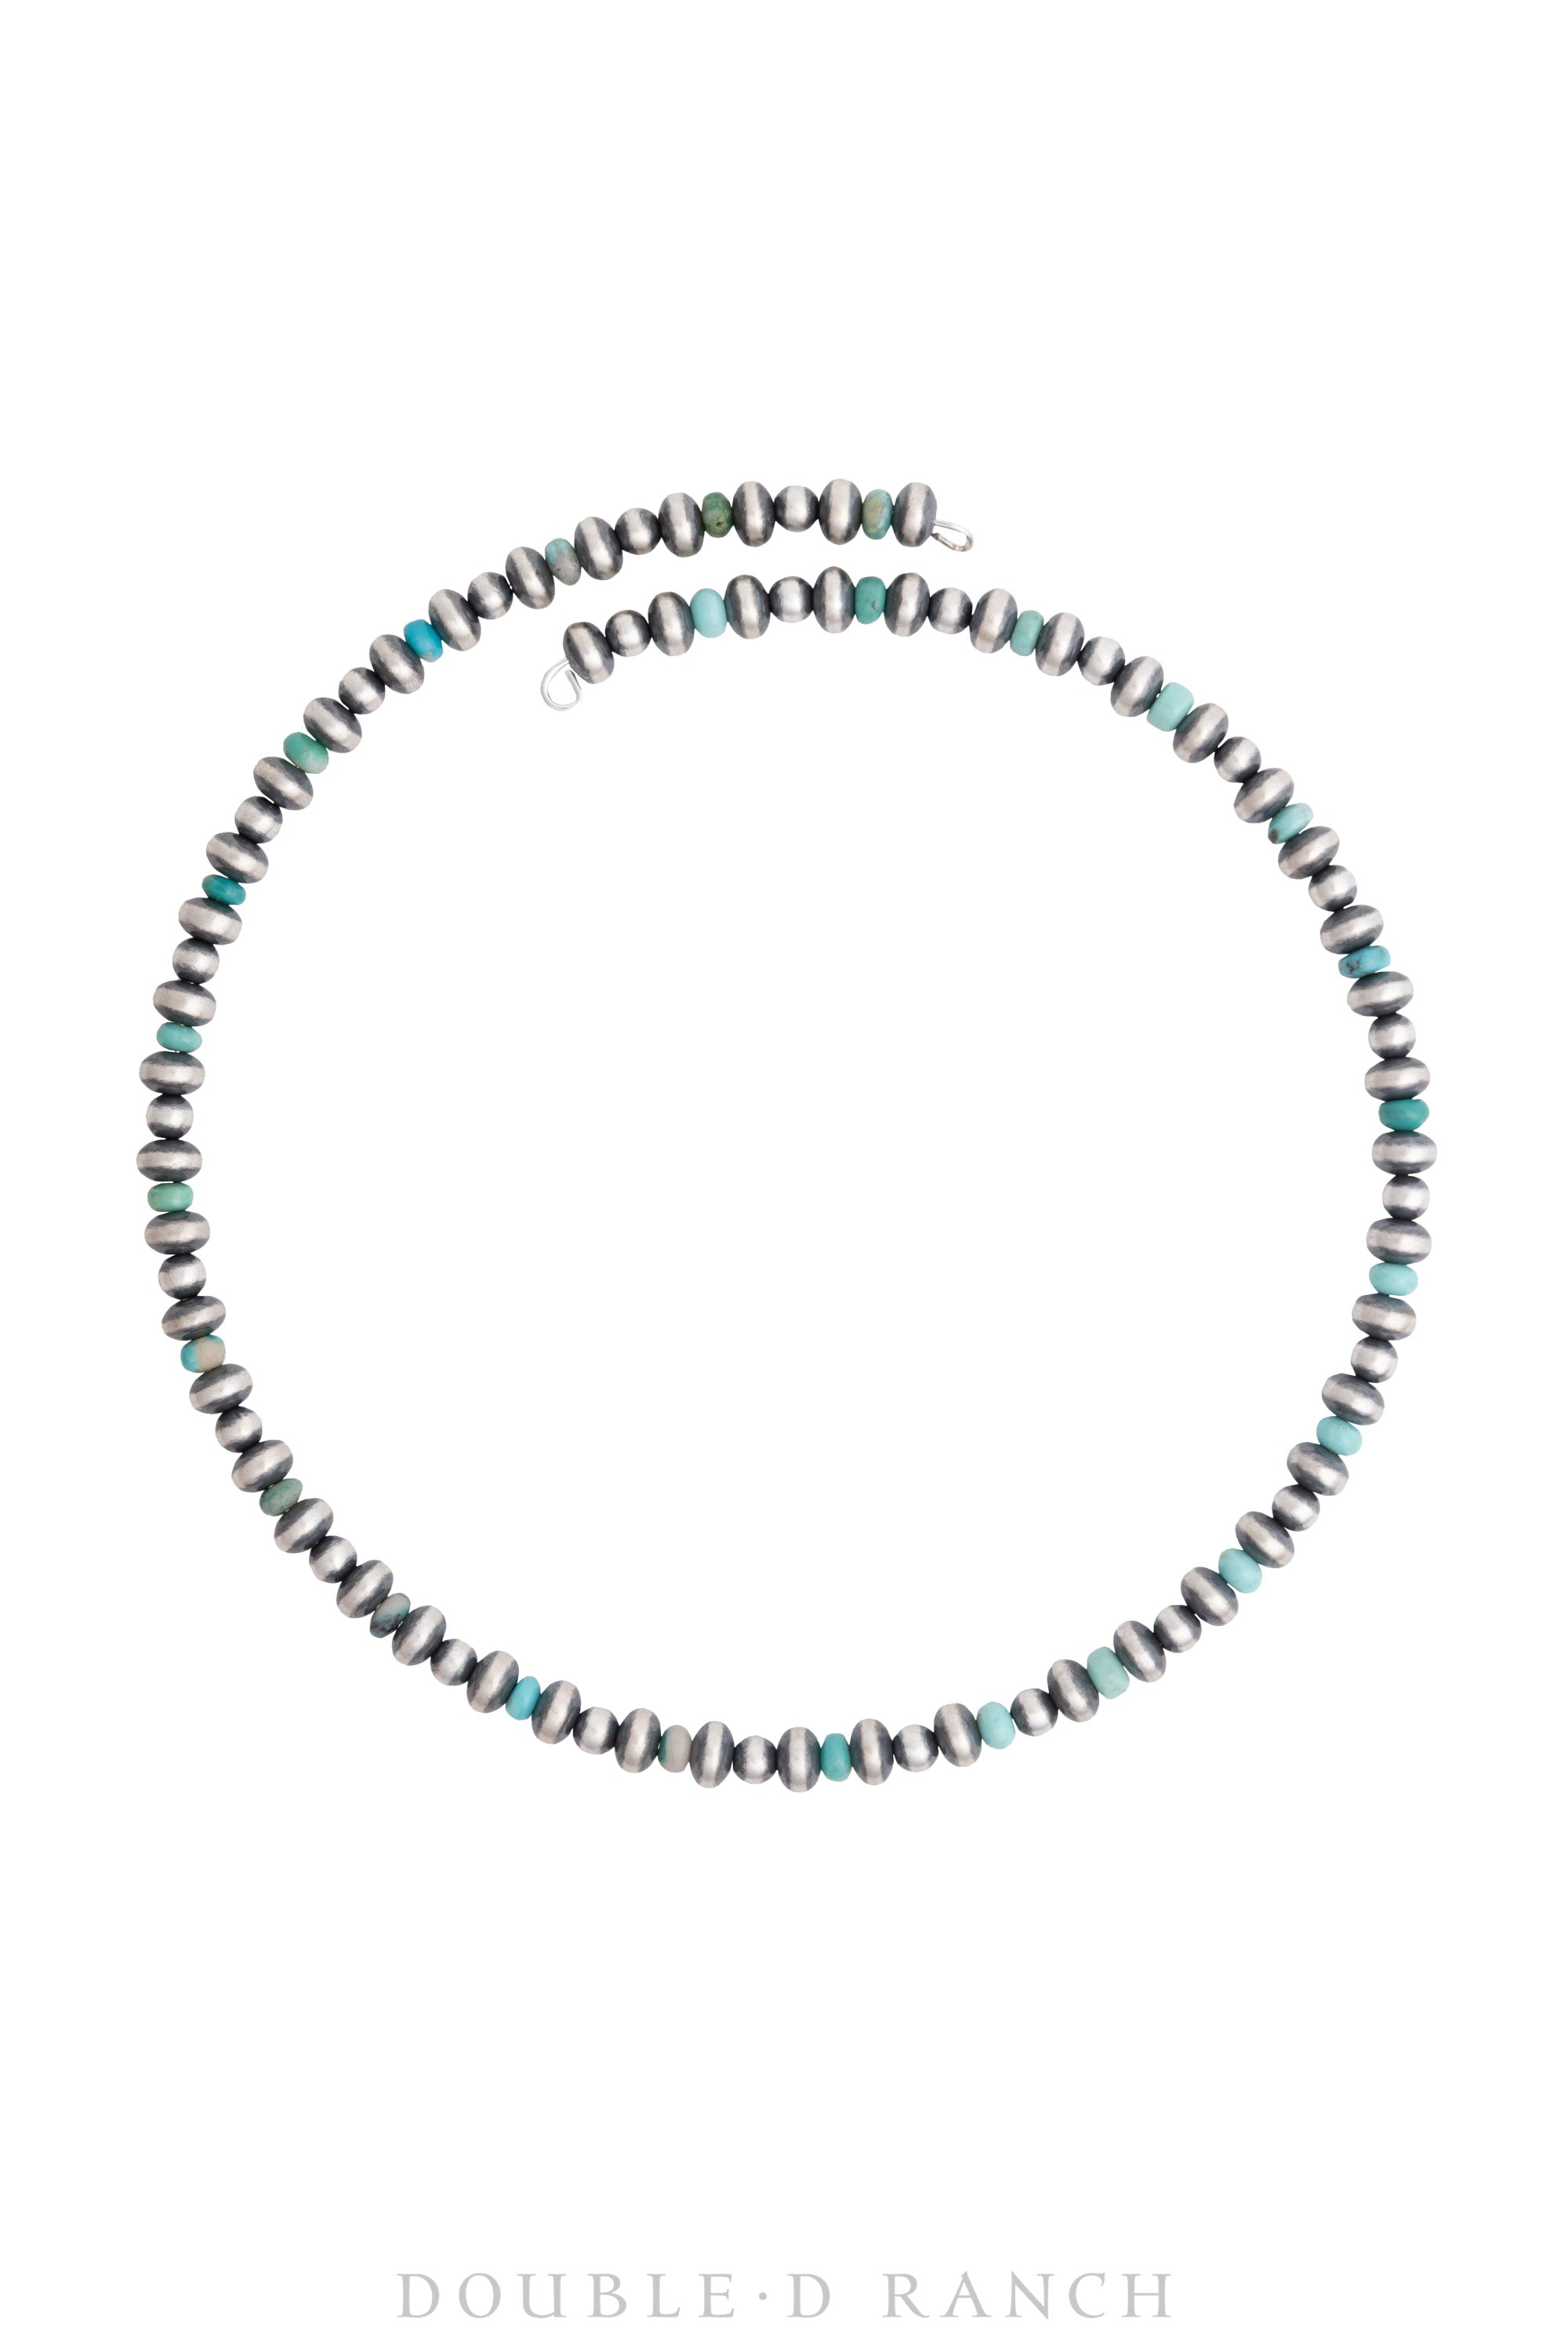 Necklace, Collar, Sterling Silver, Turquoise, Contemporary, 2007